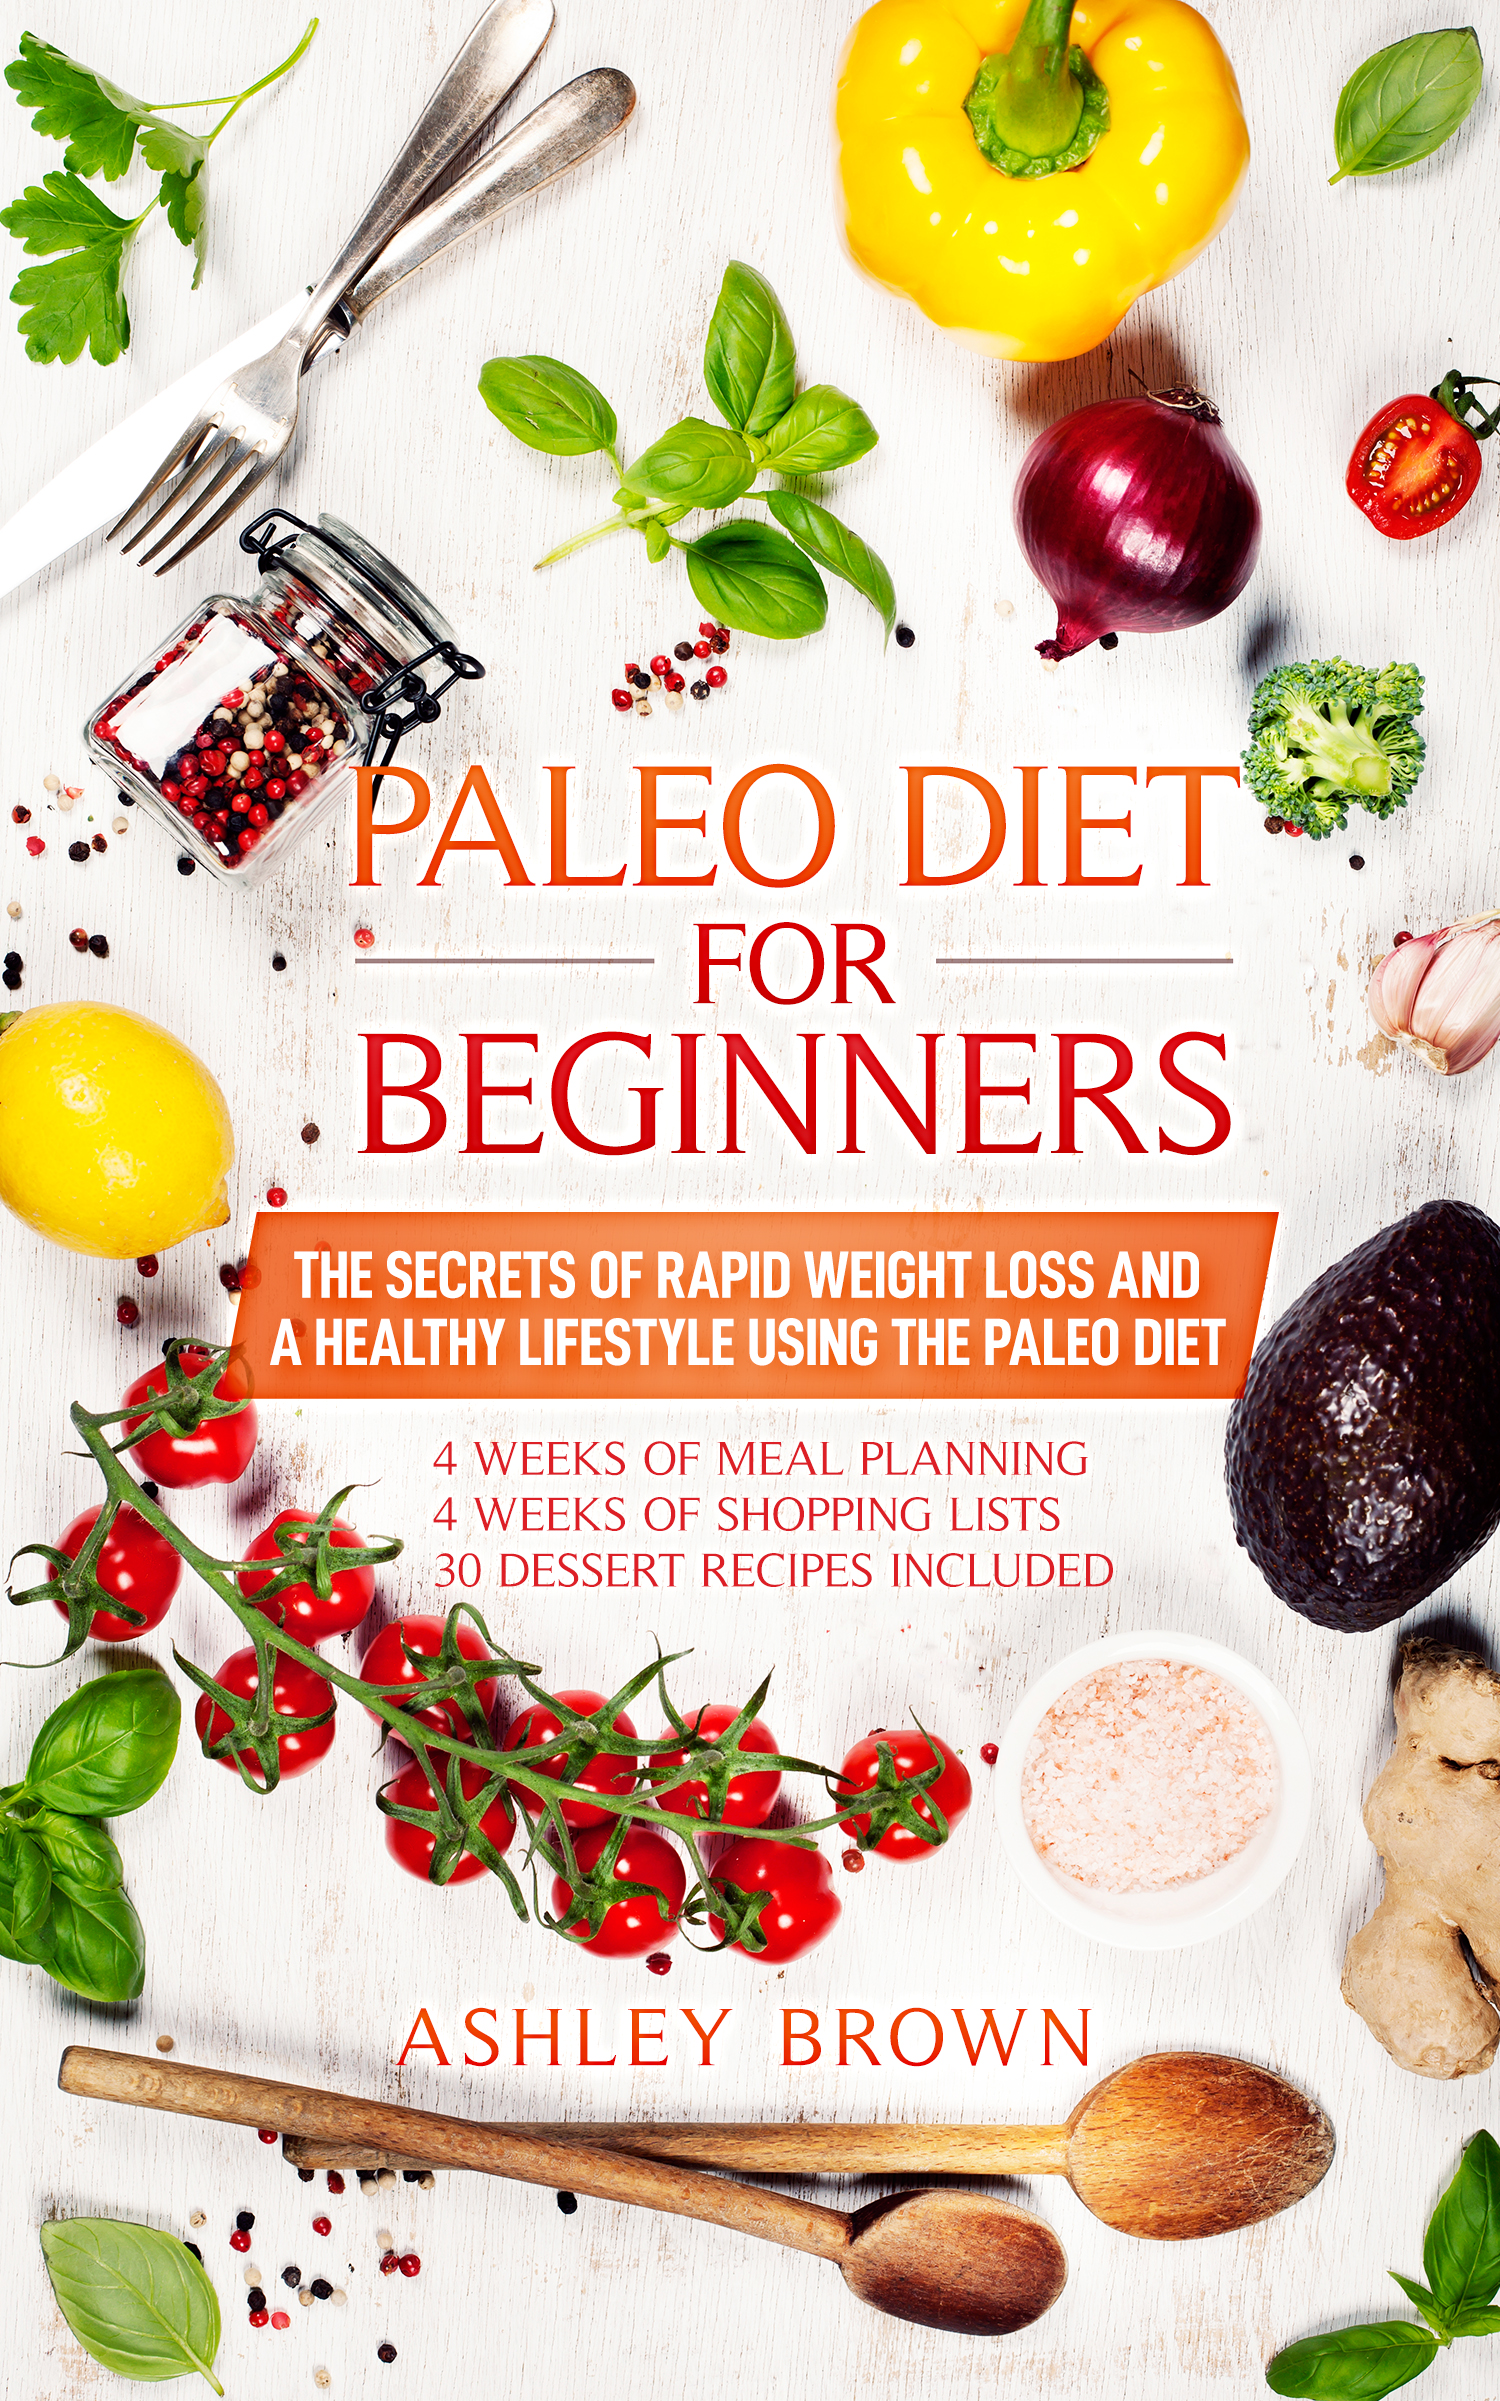 FREE: PALEO DIET FOR BEGINNERS by Ashley Brown